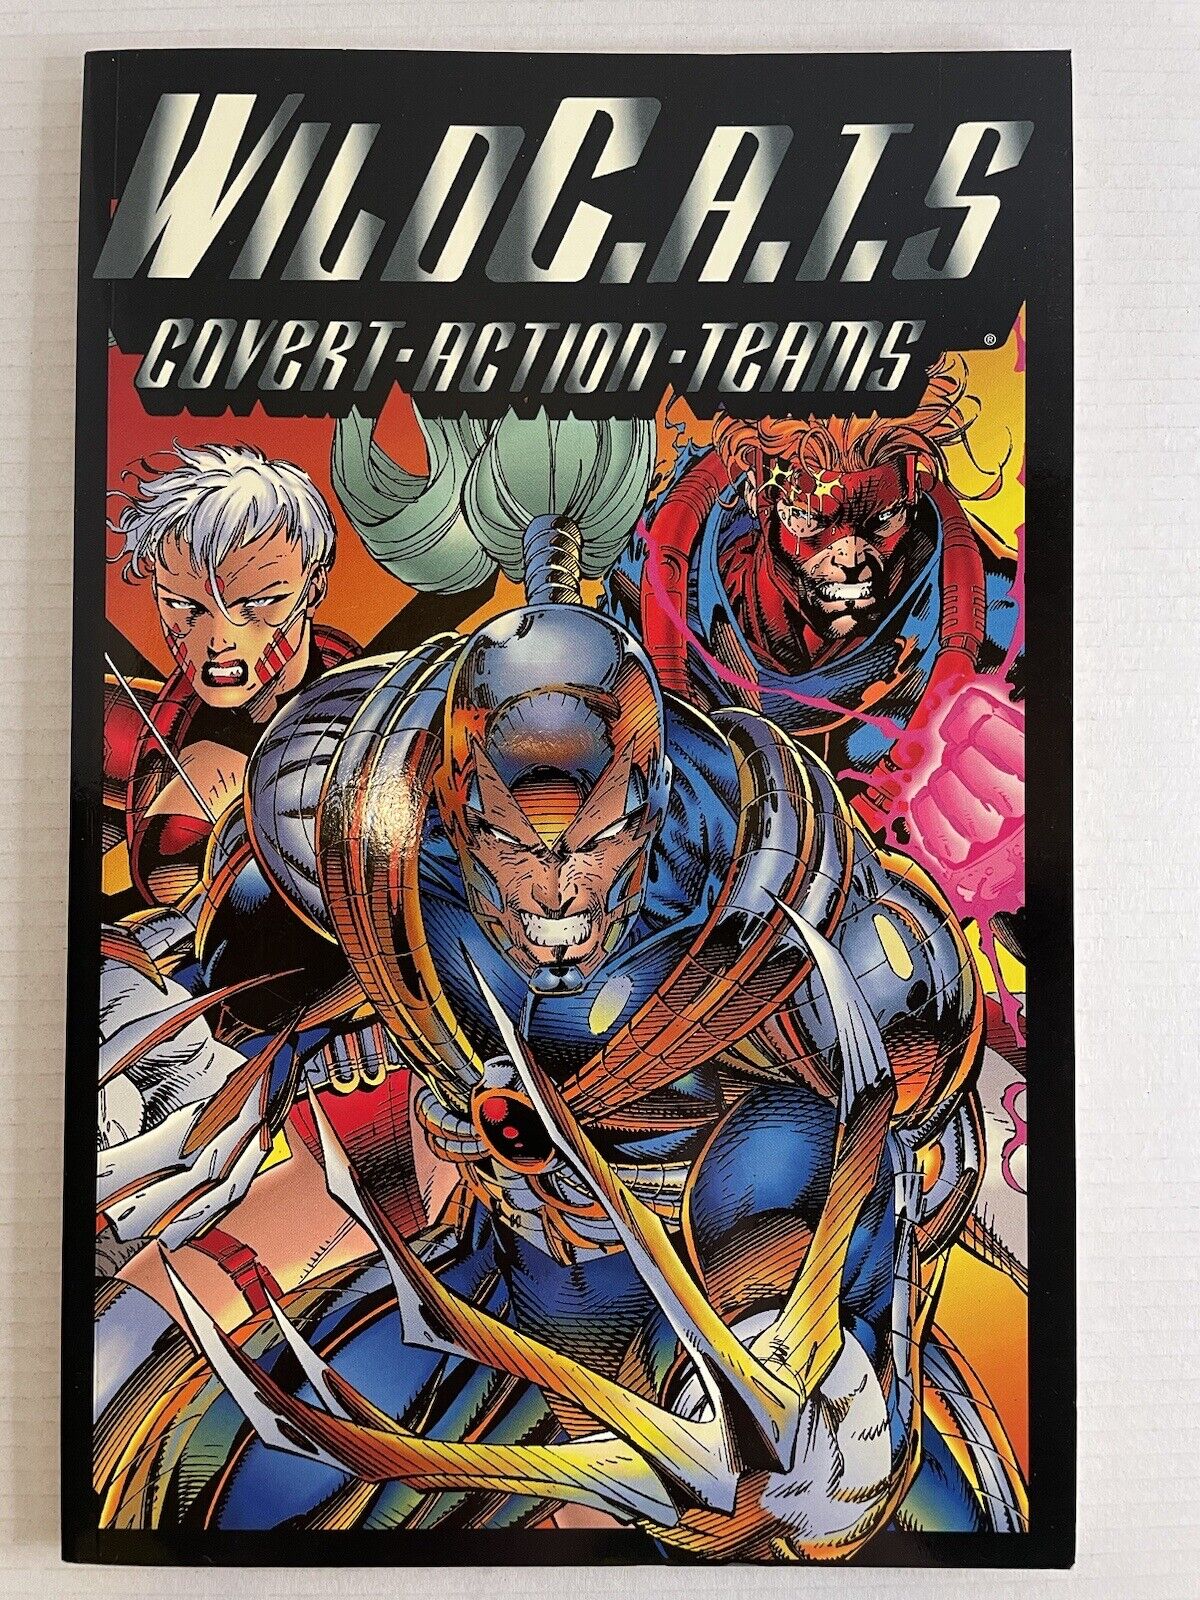 RARE First UK Edition Wild C.A.T.S Covert Action Teams Graphic Novel 1995 Titan